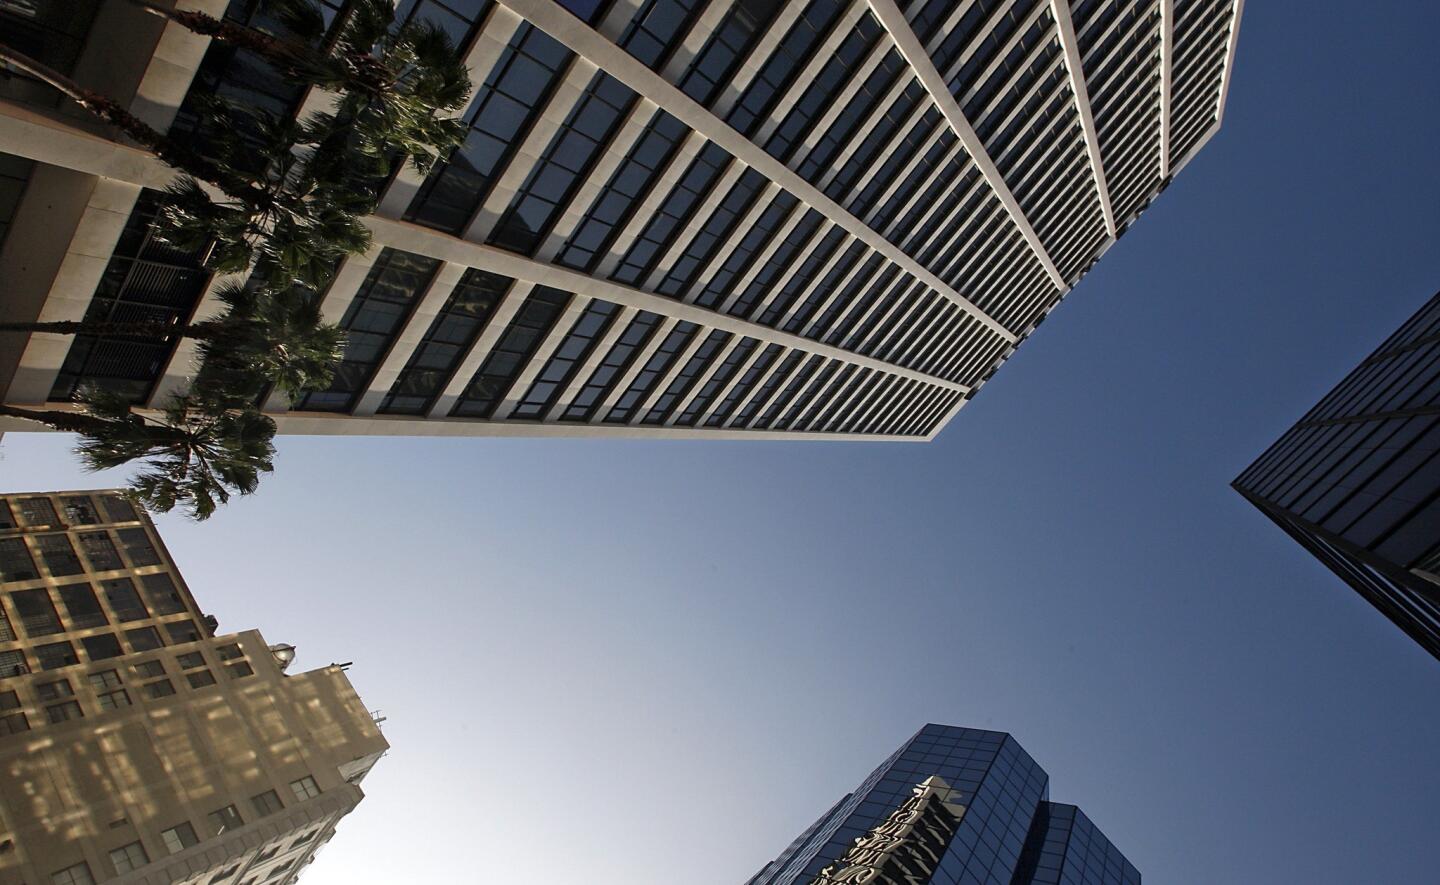 One Wilshire, shown at top, at the eastern end of Wilshire Boulevard may look like a typical office building, but it's actually what's known as a "telecom hotel," holding servers, routers and other equipment for telecommunications companies, Internet service providers and other digital firms.